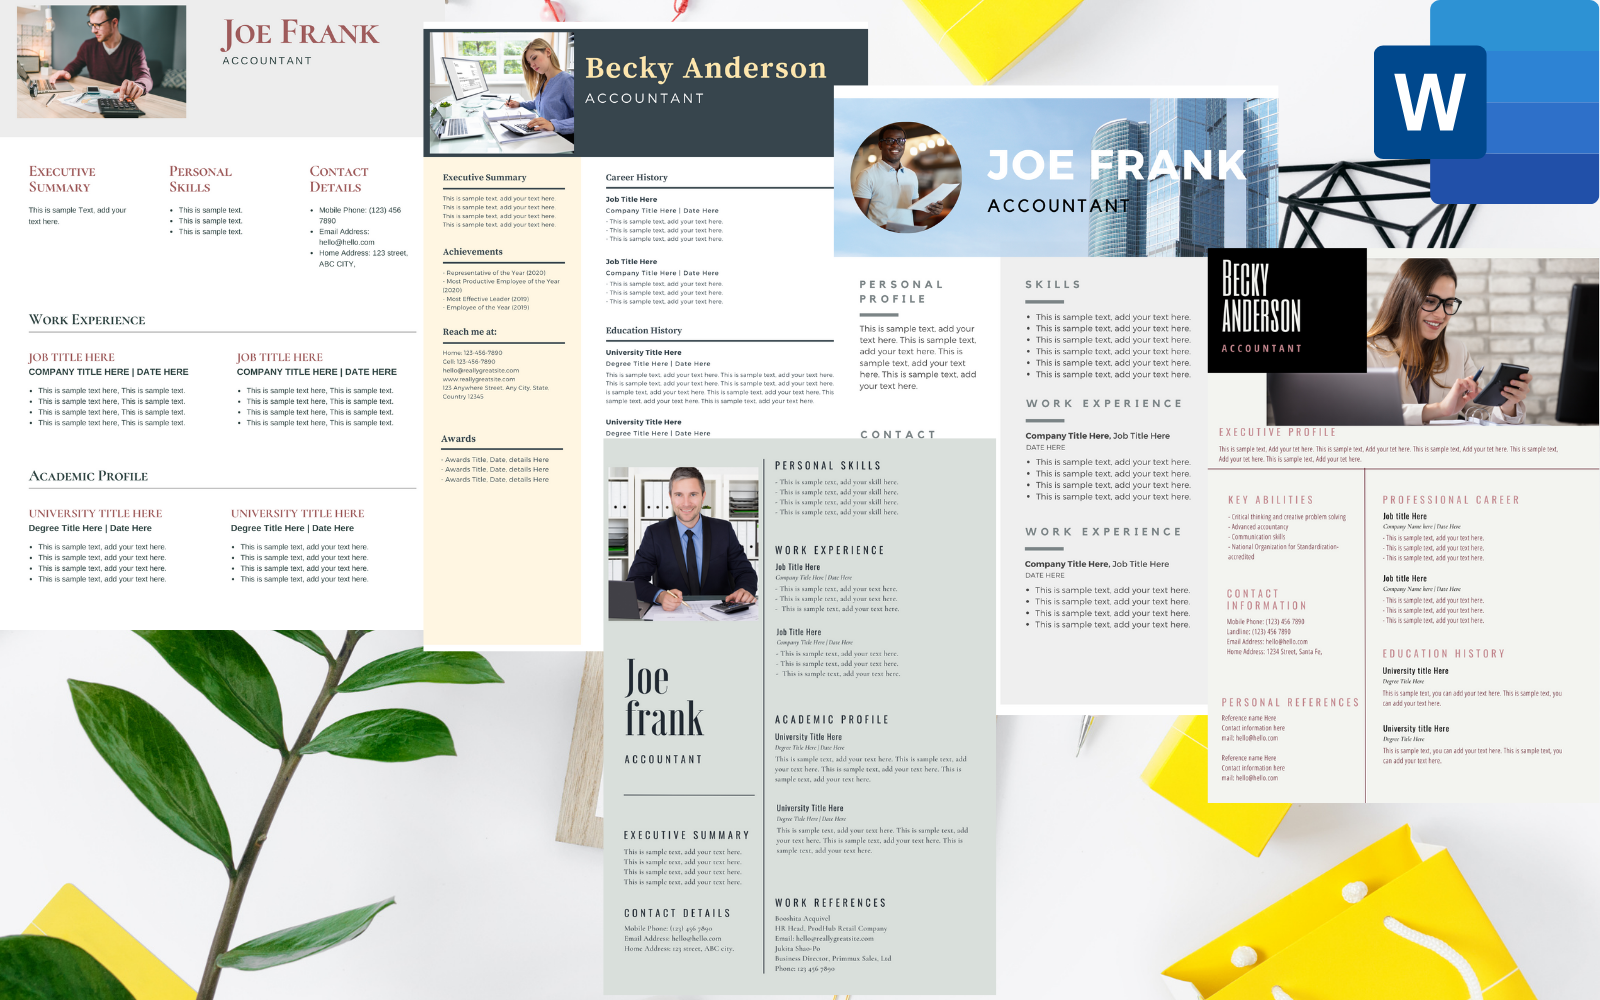 Pack of 5 Professional Accountant Resume Templates for MS word.